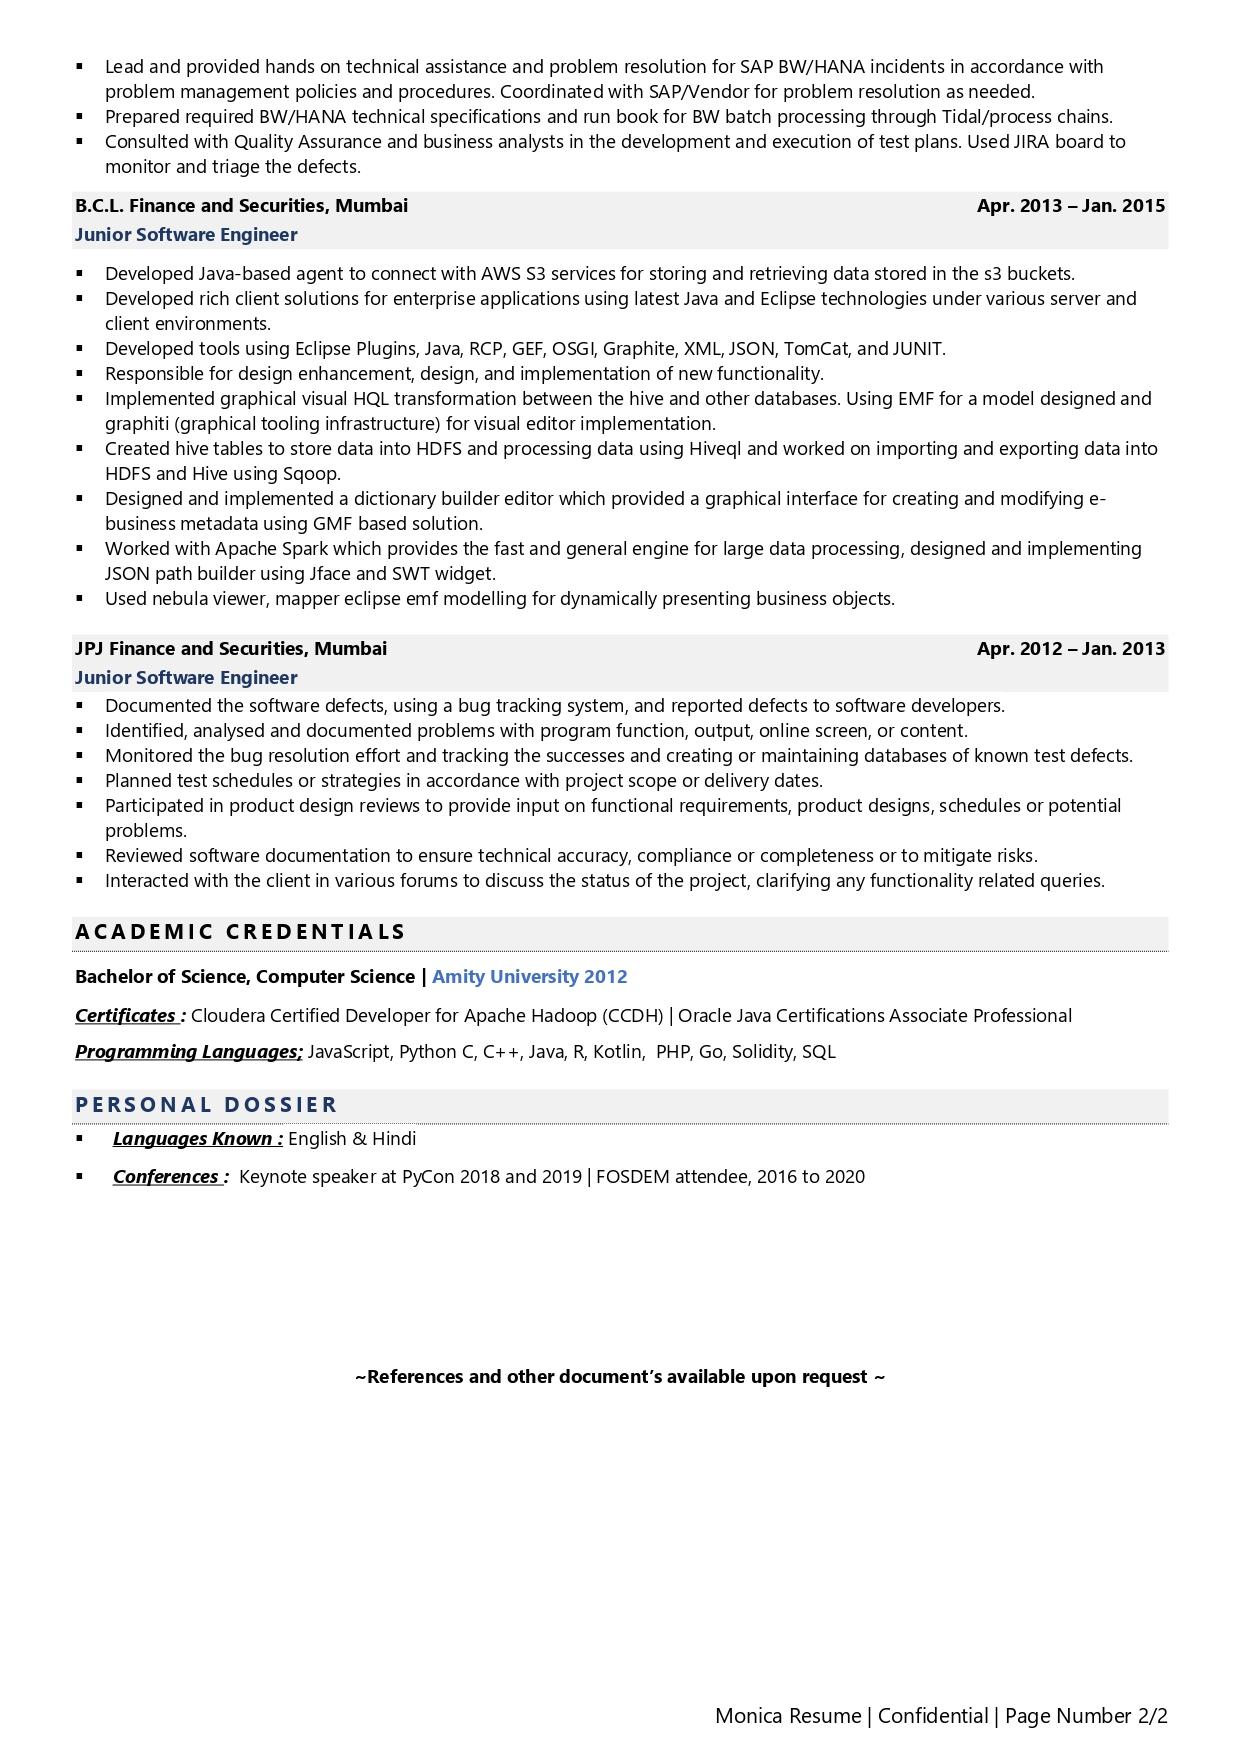 Software Engineer - Resume Example & Template